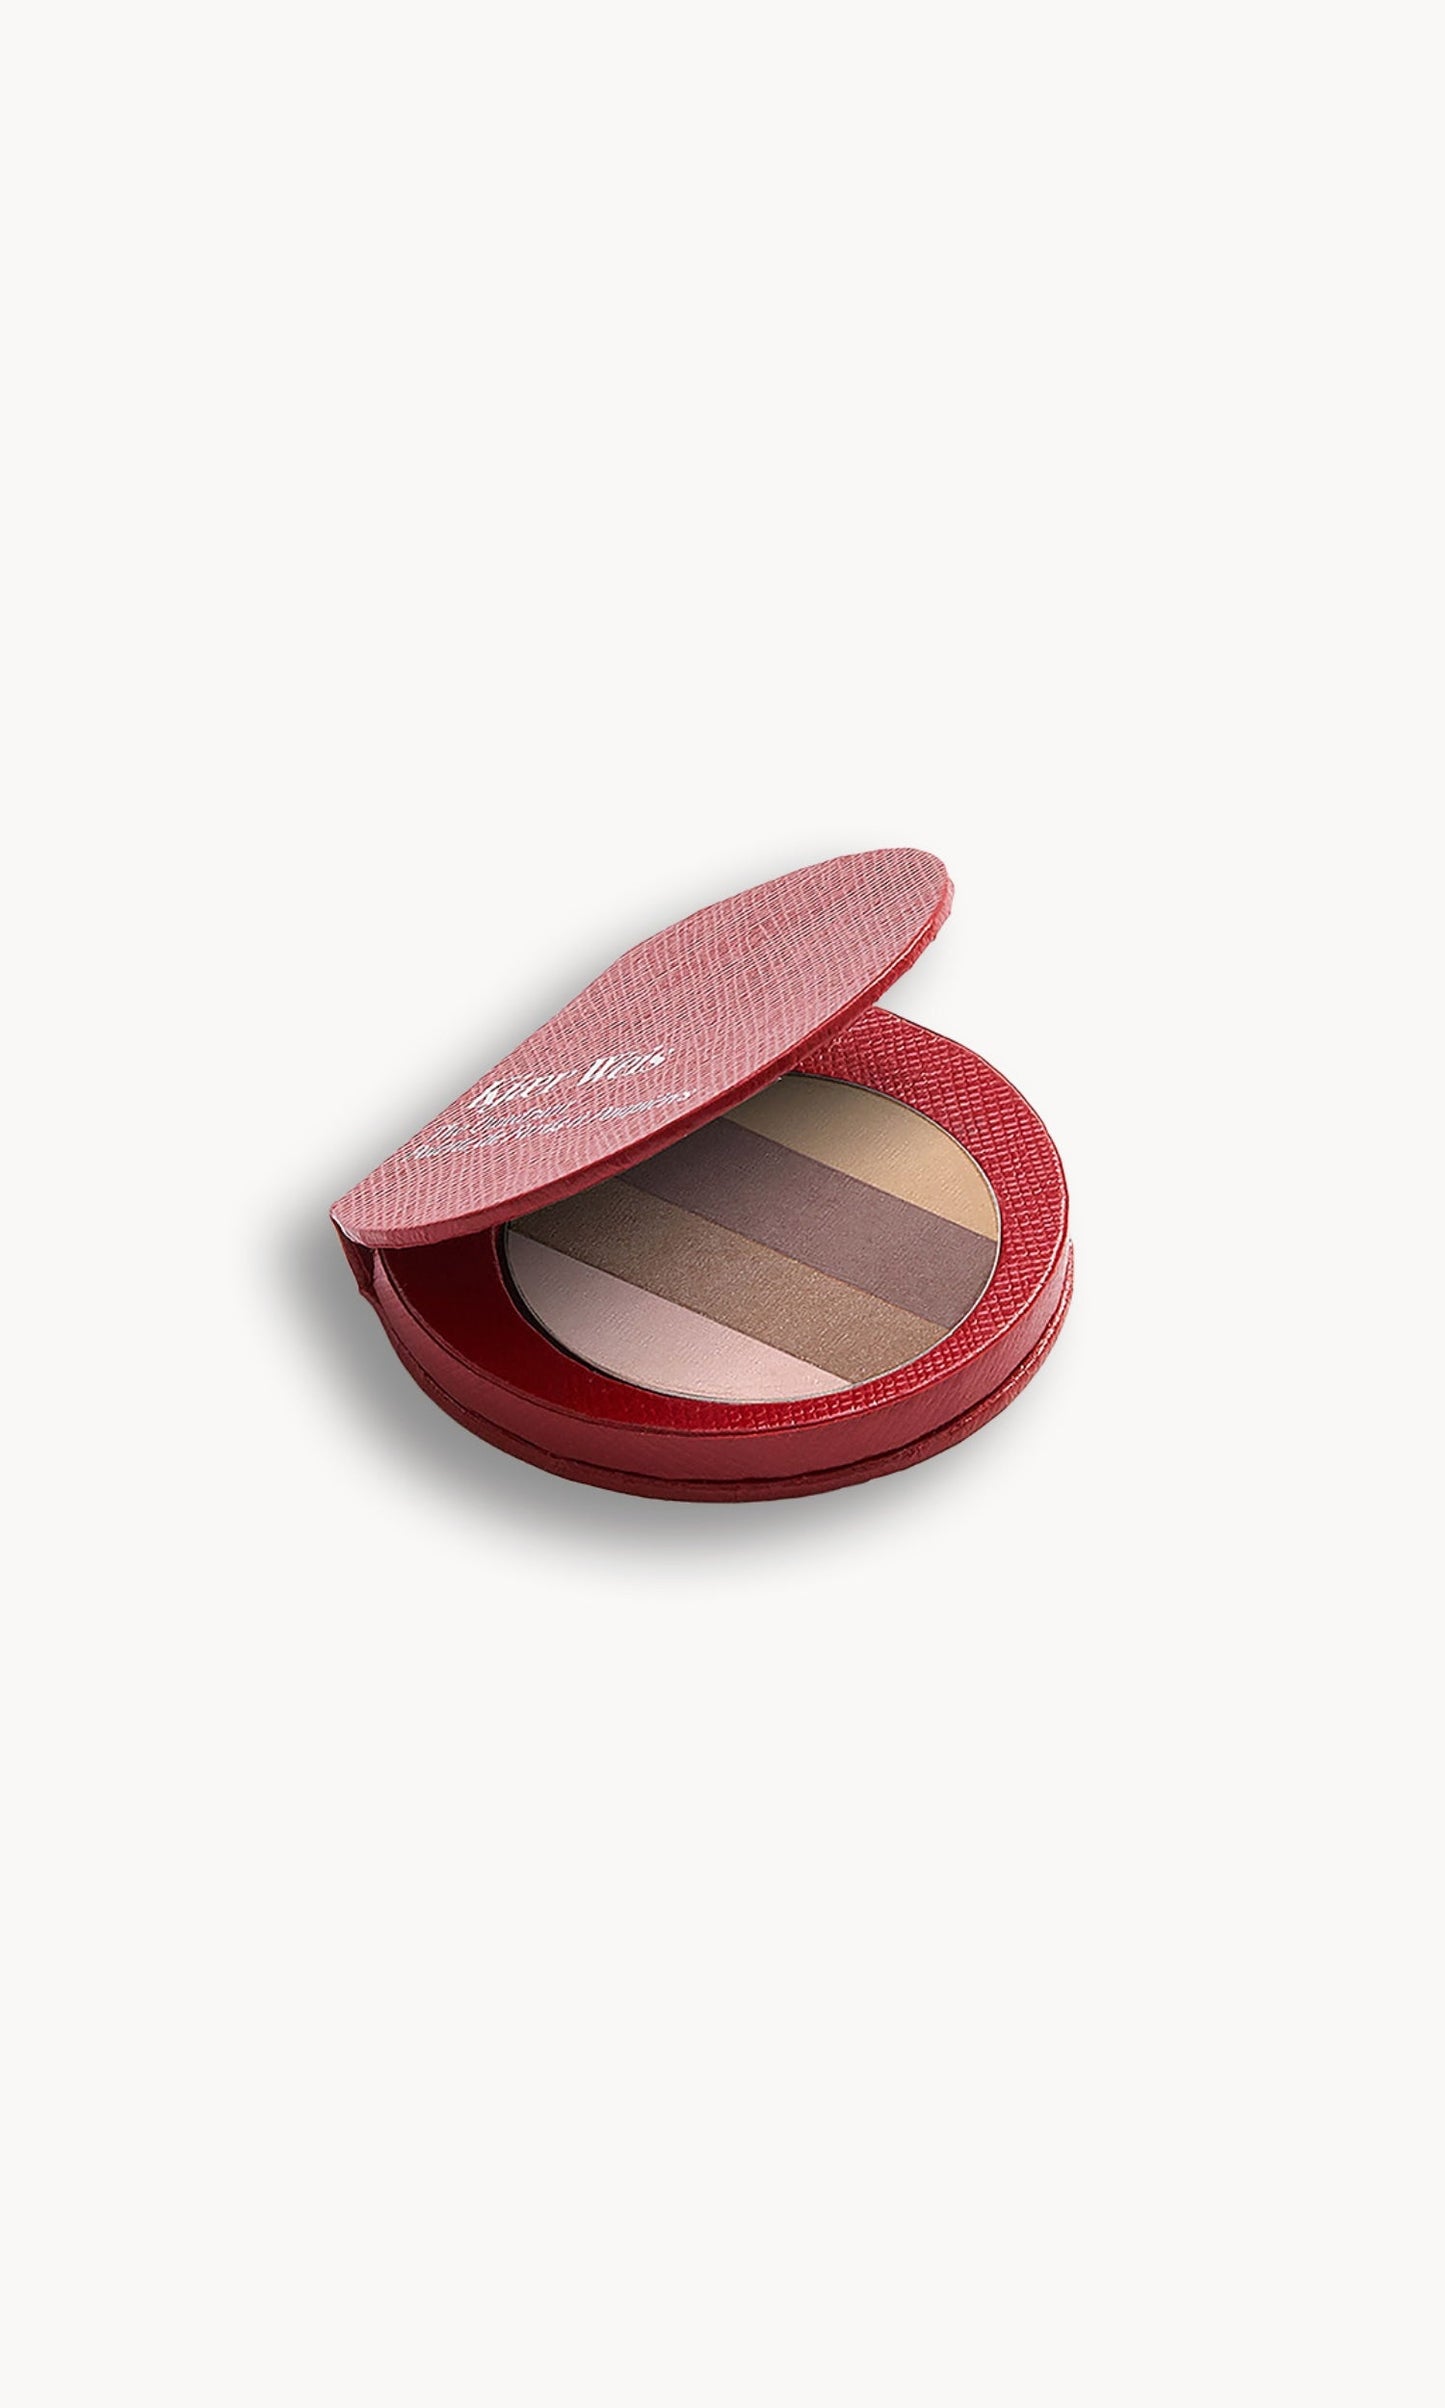 Red KW palette open to show the eye shadow quadrant inside